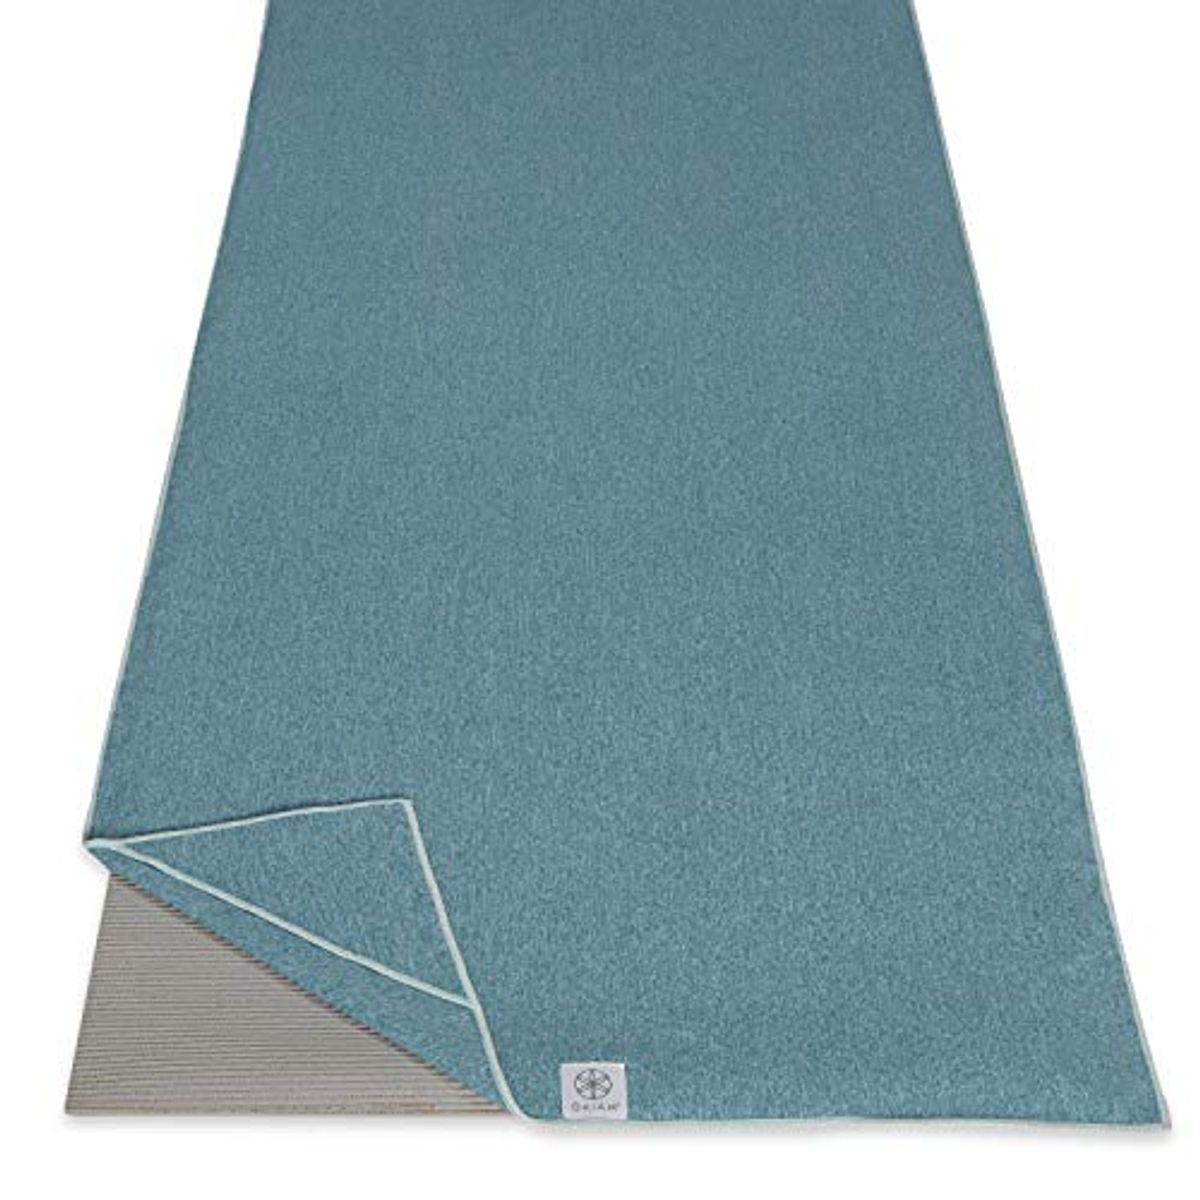 5 Reasons Why a Yoga Mat Towel is Essential for Your Practice